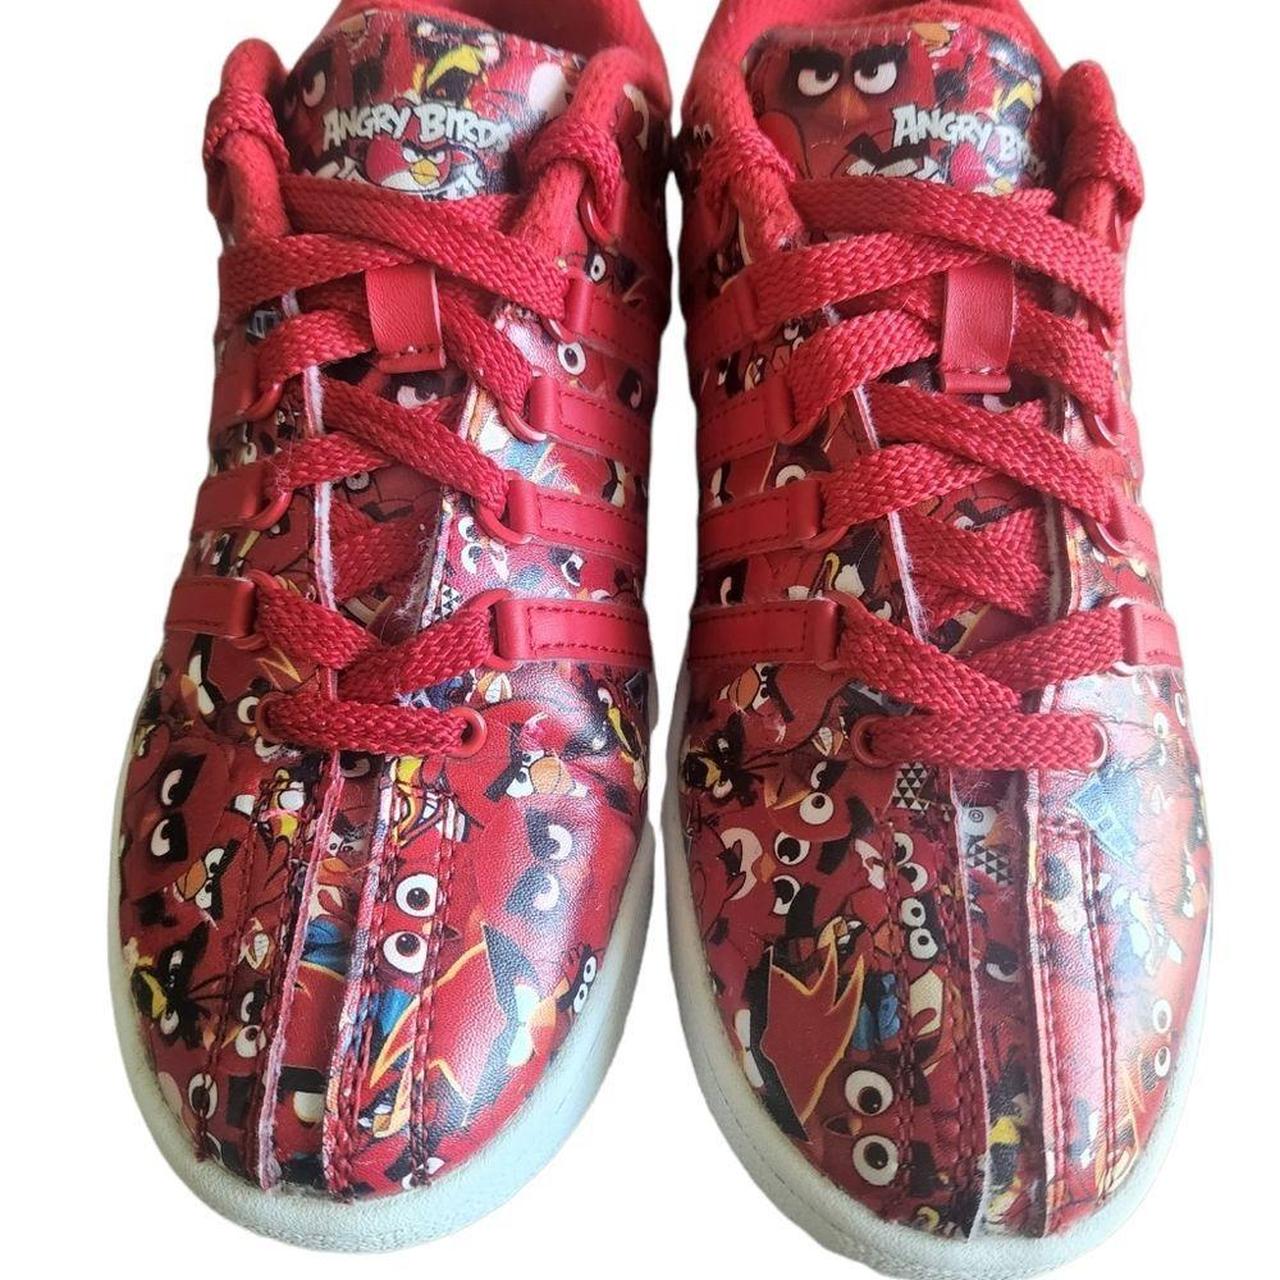 Product Image 2 - K- Swiss Angry Birds Red